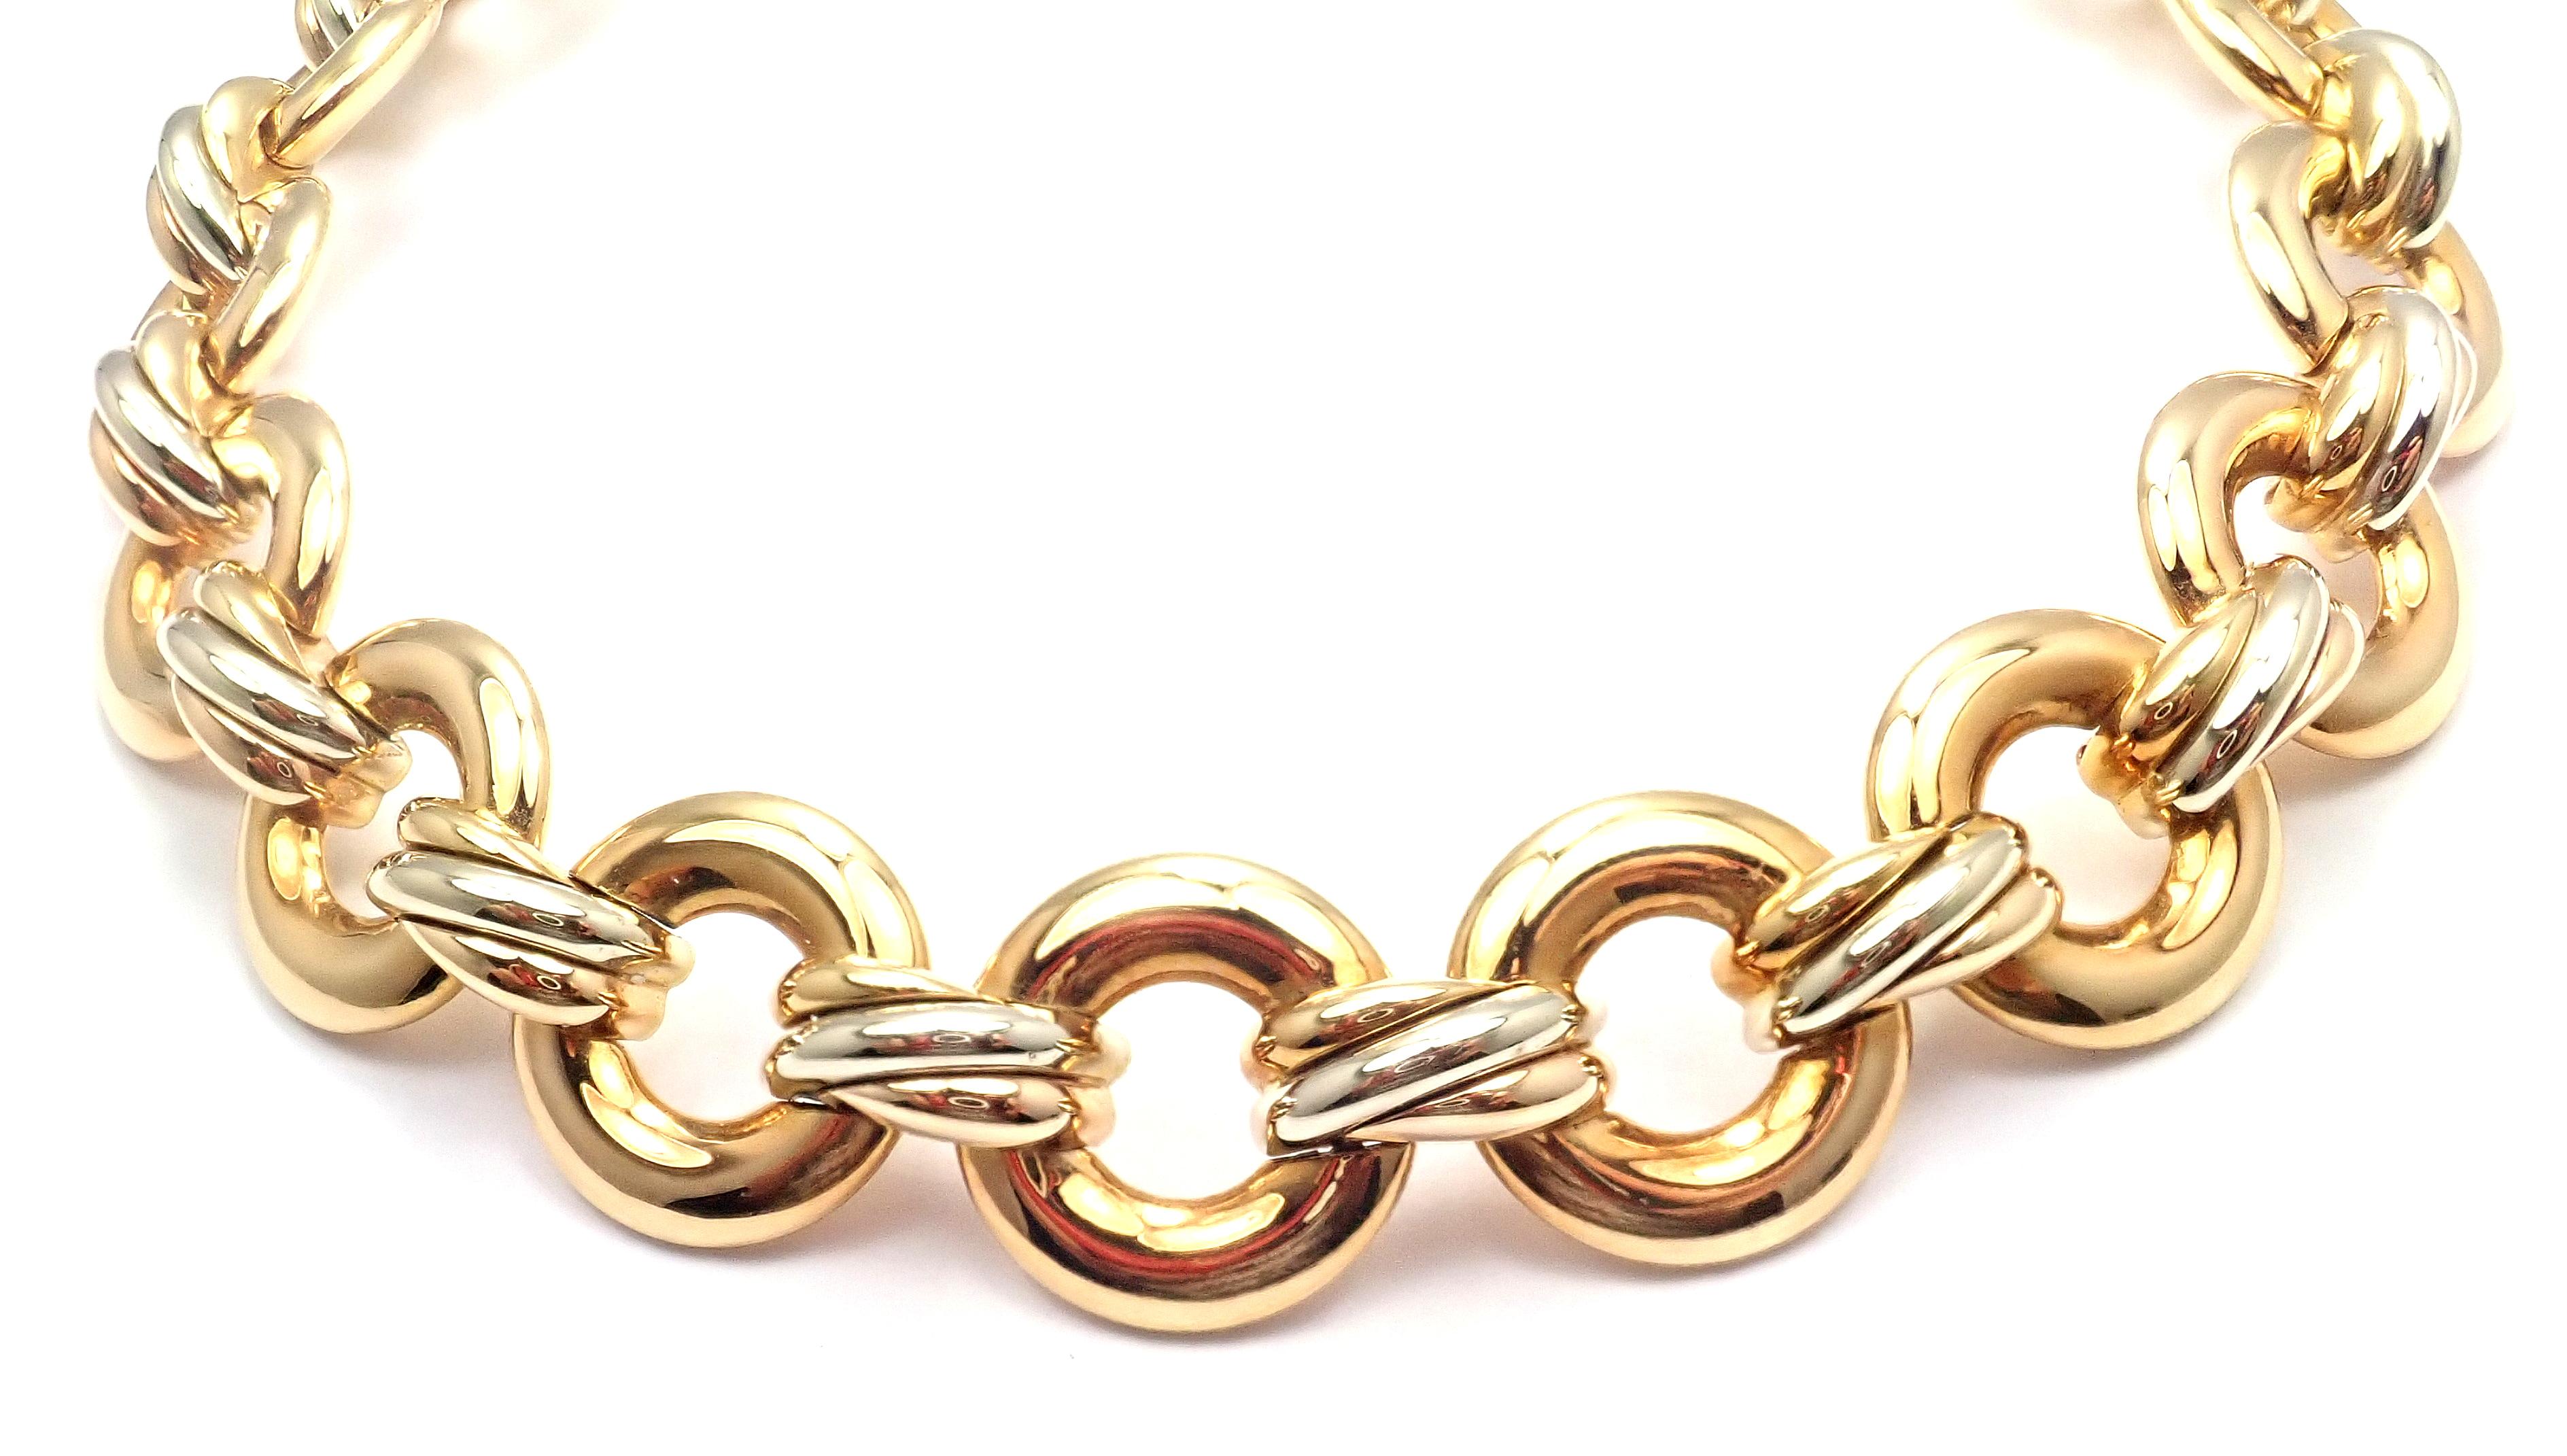 18k Multi Color Gold Round Link Trinity Choker Necklace by Cartier. 
Details: 
Length: 16''
Width: 21mm
Weight: 131.4 grams
Stamped Hallmarks: Cartier,  750,  1996, D(*Serial Omitted*)
*Free Shipping within the United States* 
YOUR PRICE: